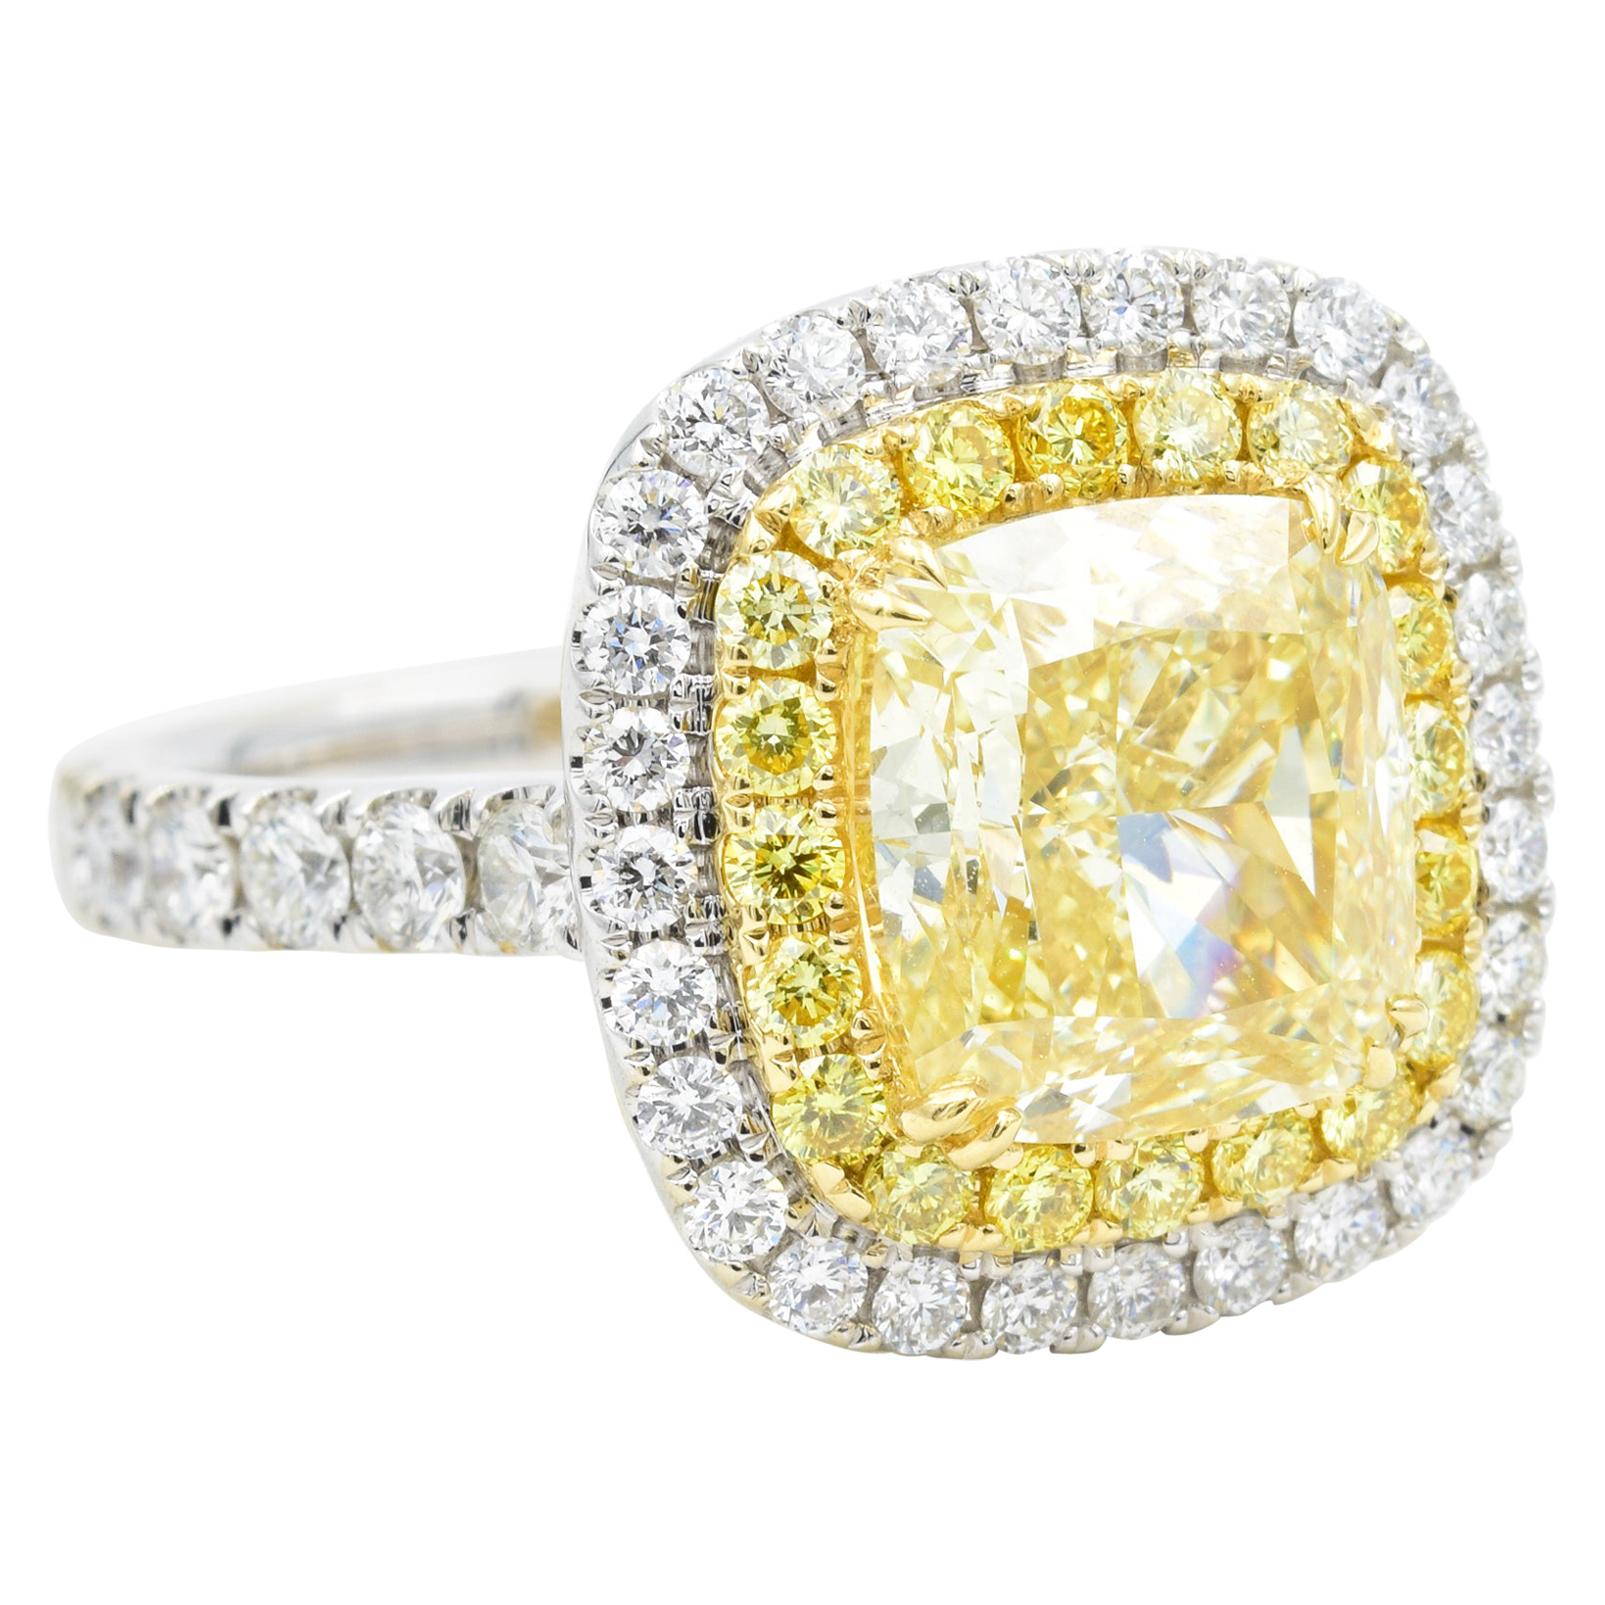 4.01 Carat GIA Certified Fancy Yellow Diamond Engagement Ring with 5.26 Carat